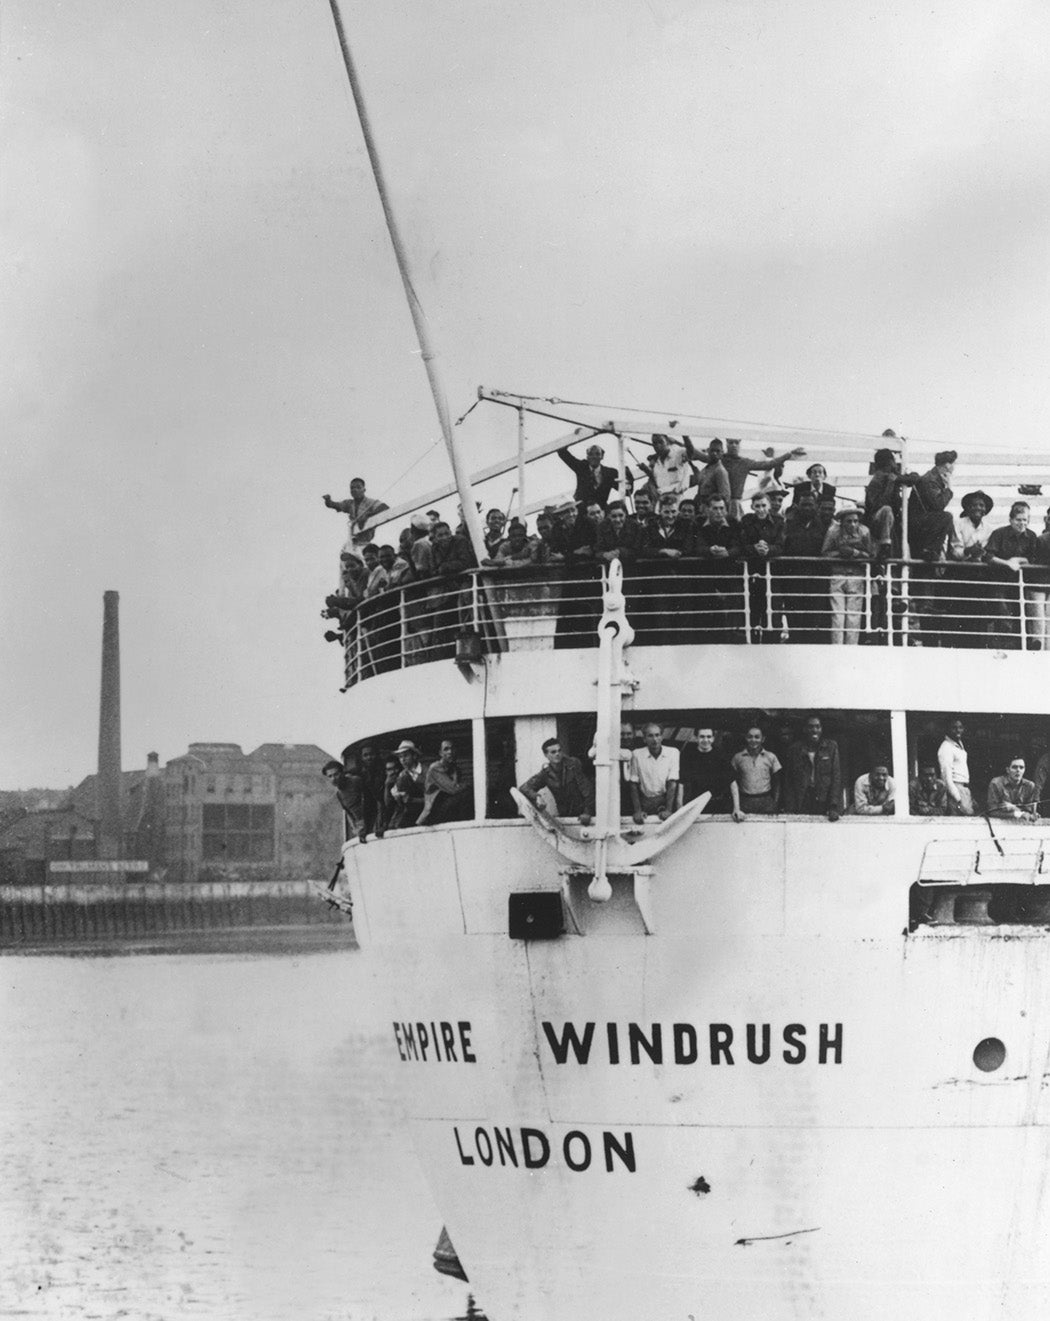 The ex-troopship 'Empire Windrush' arriving at Tilbury Docks from Jamaica, with 482 Jamaicans on board, emigrating to Britain, June 22, 1948